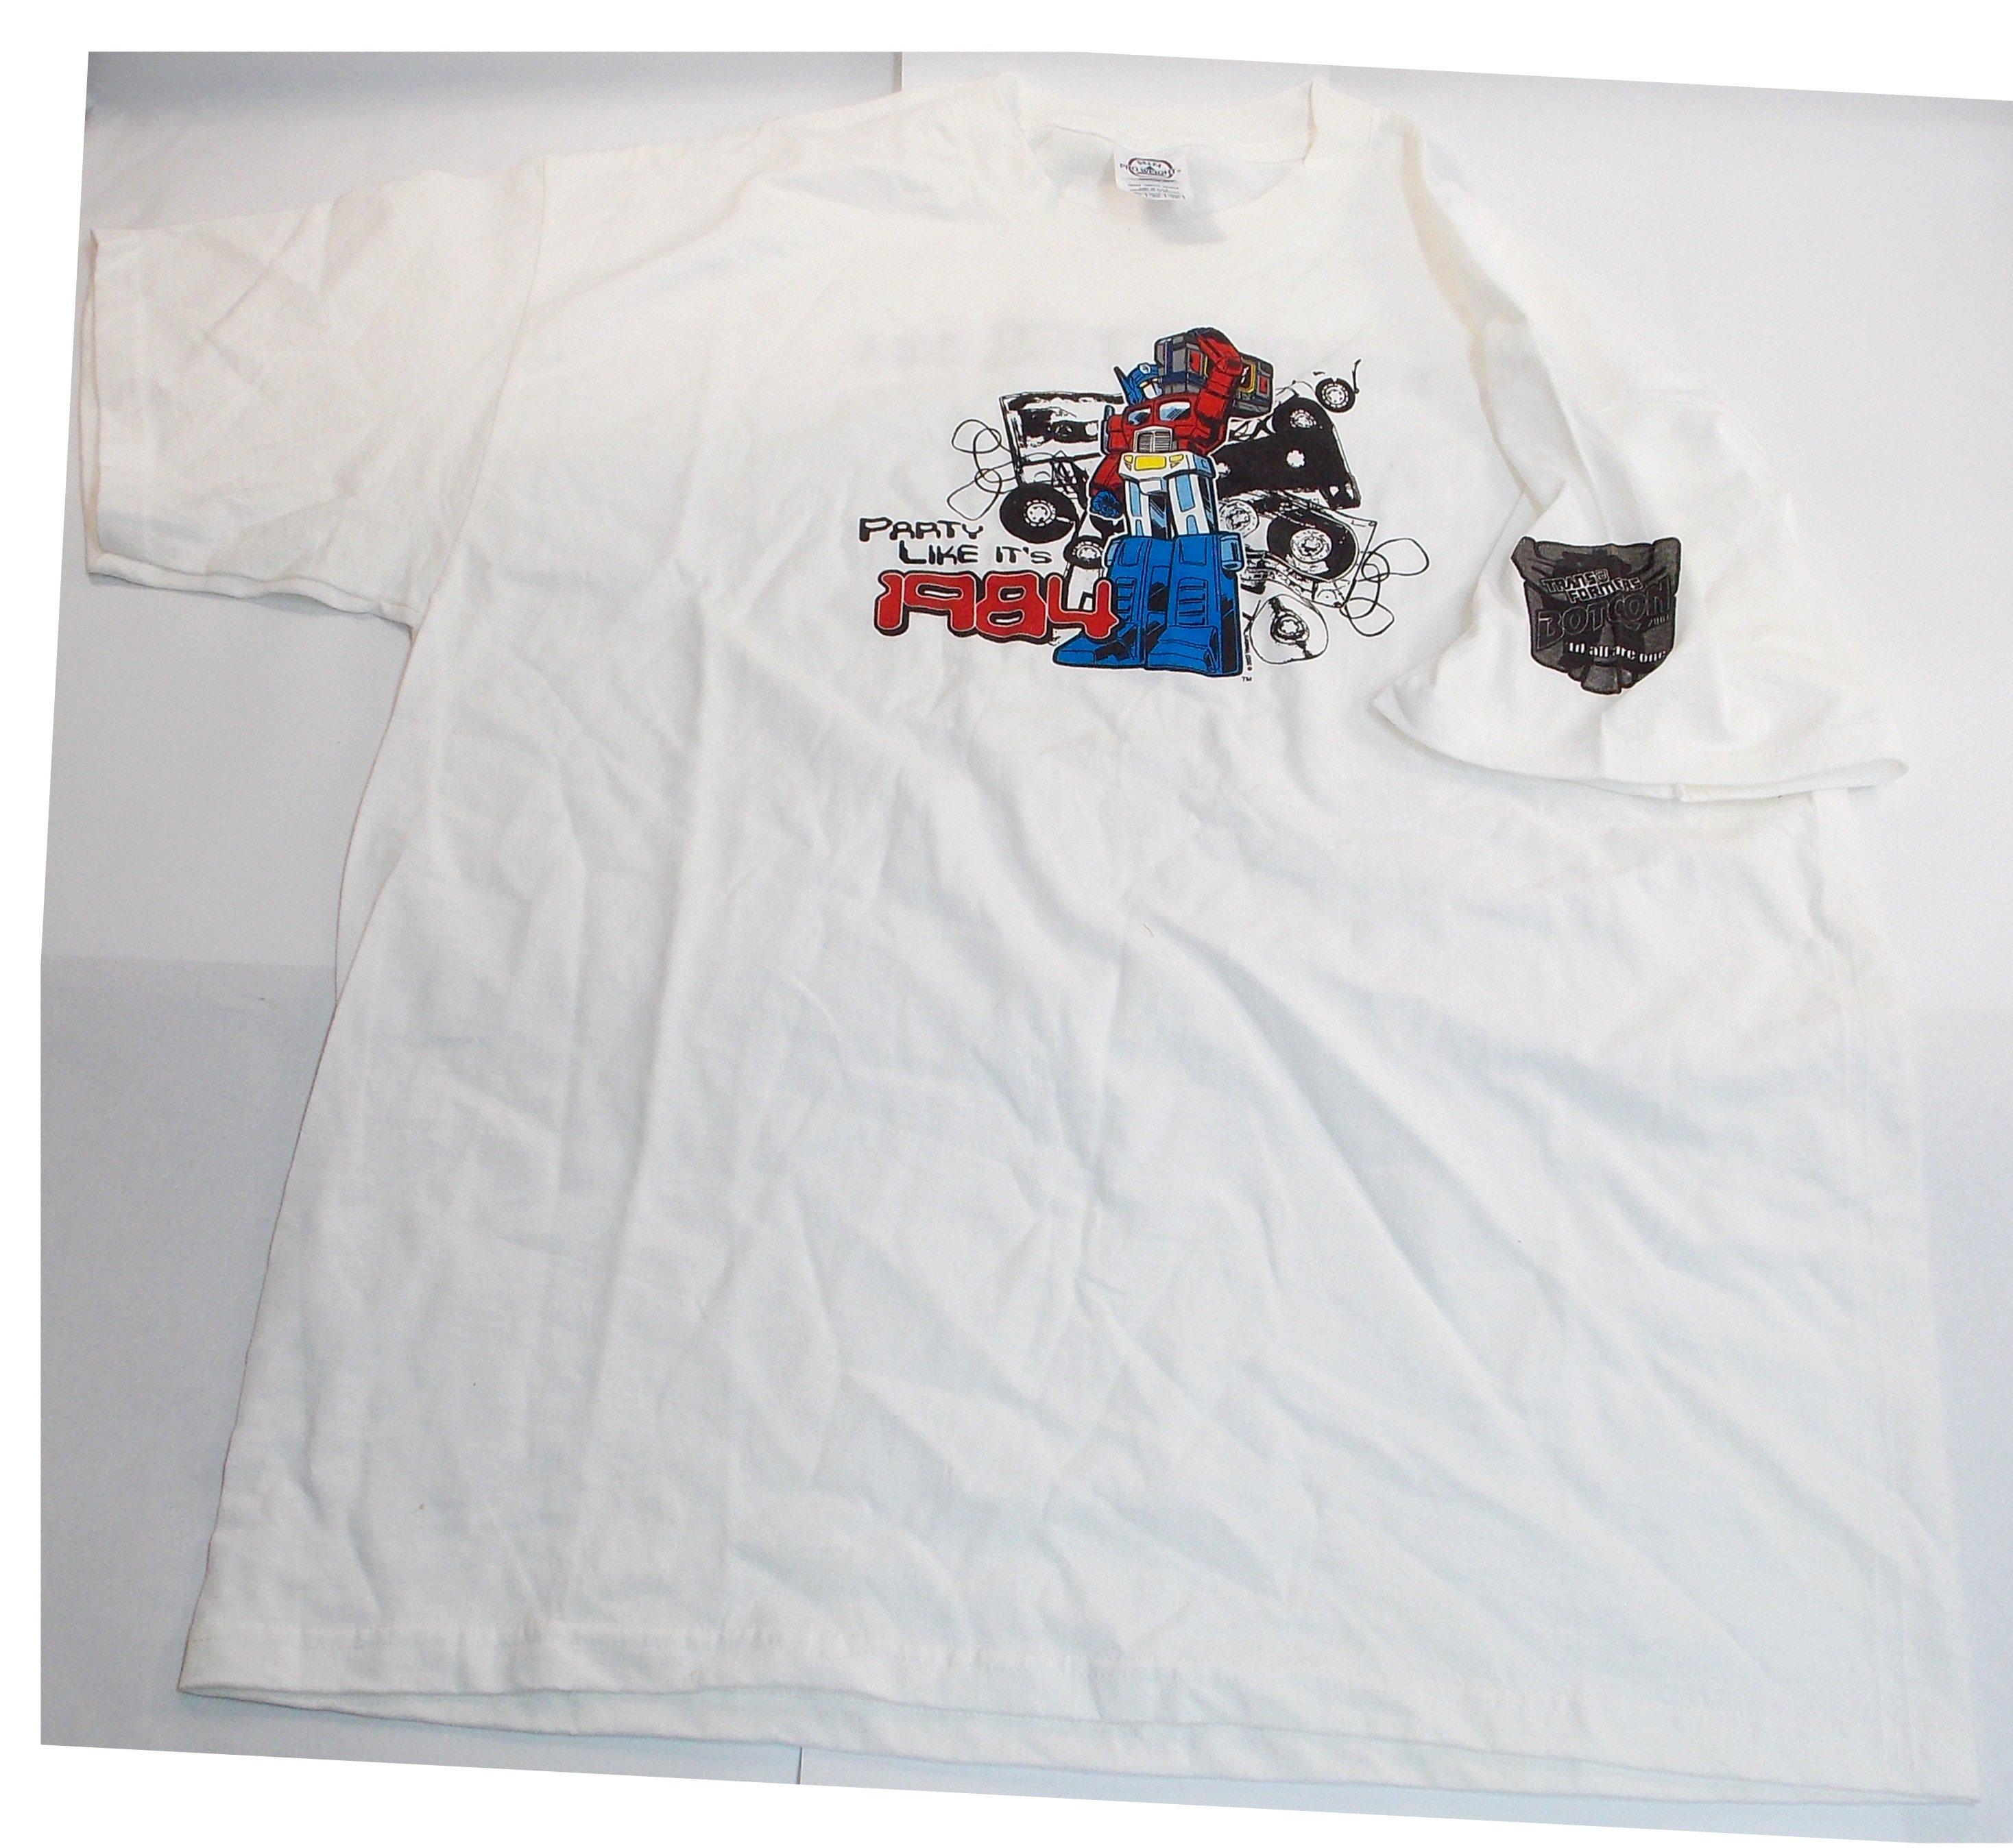 2007 Transformers "Party Like it's 1984" T-Shirt Size XL - Exclusive Botcon Convention Exclusive